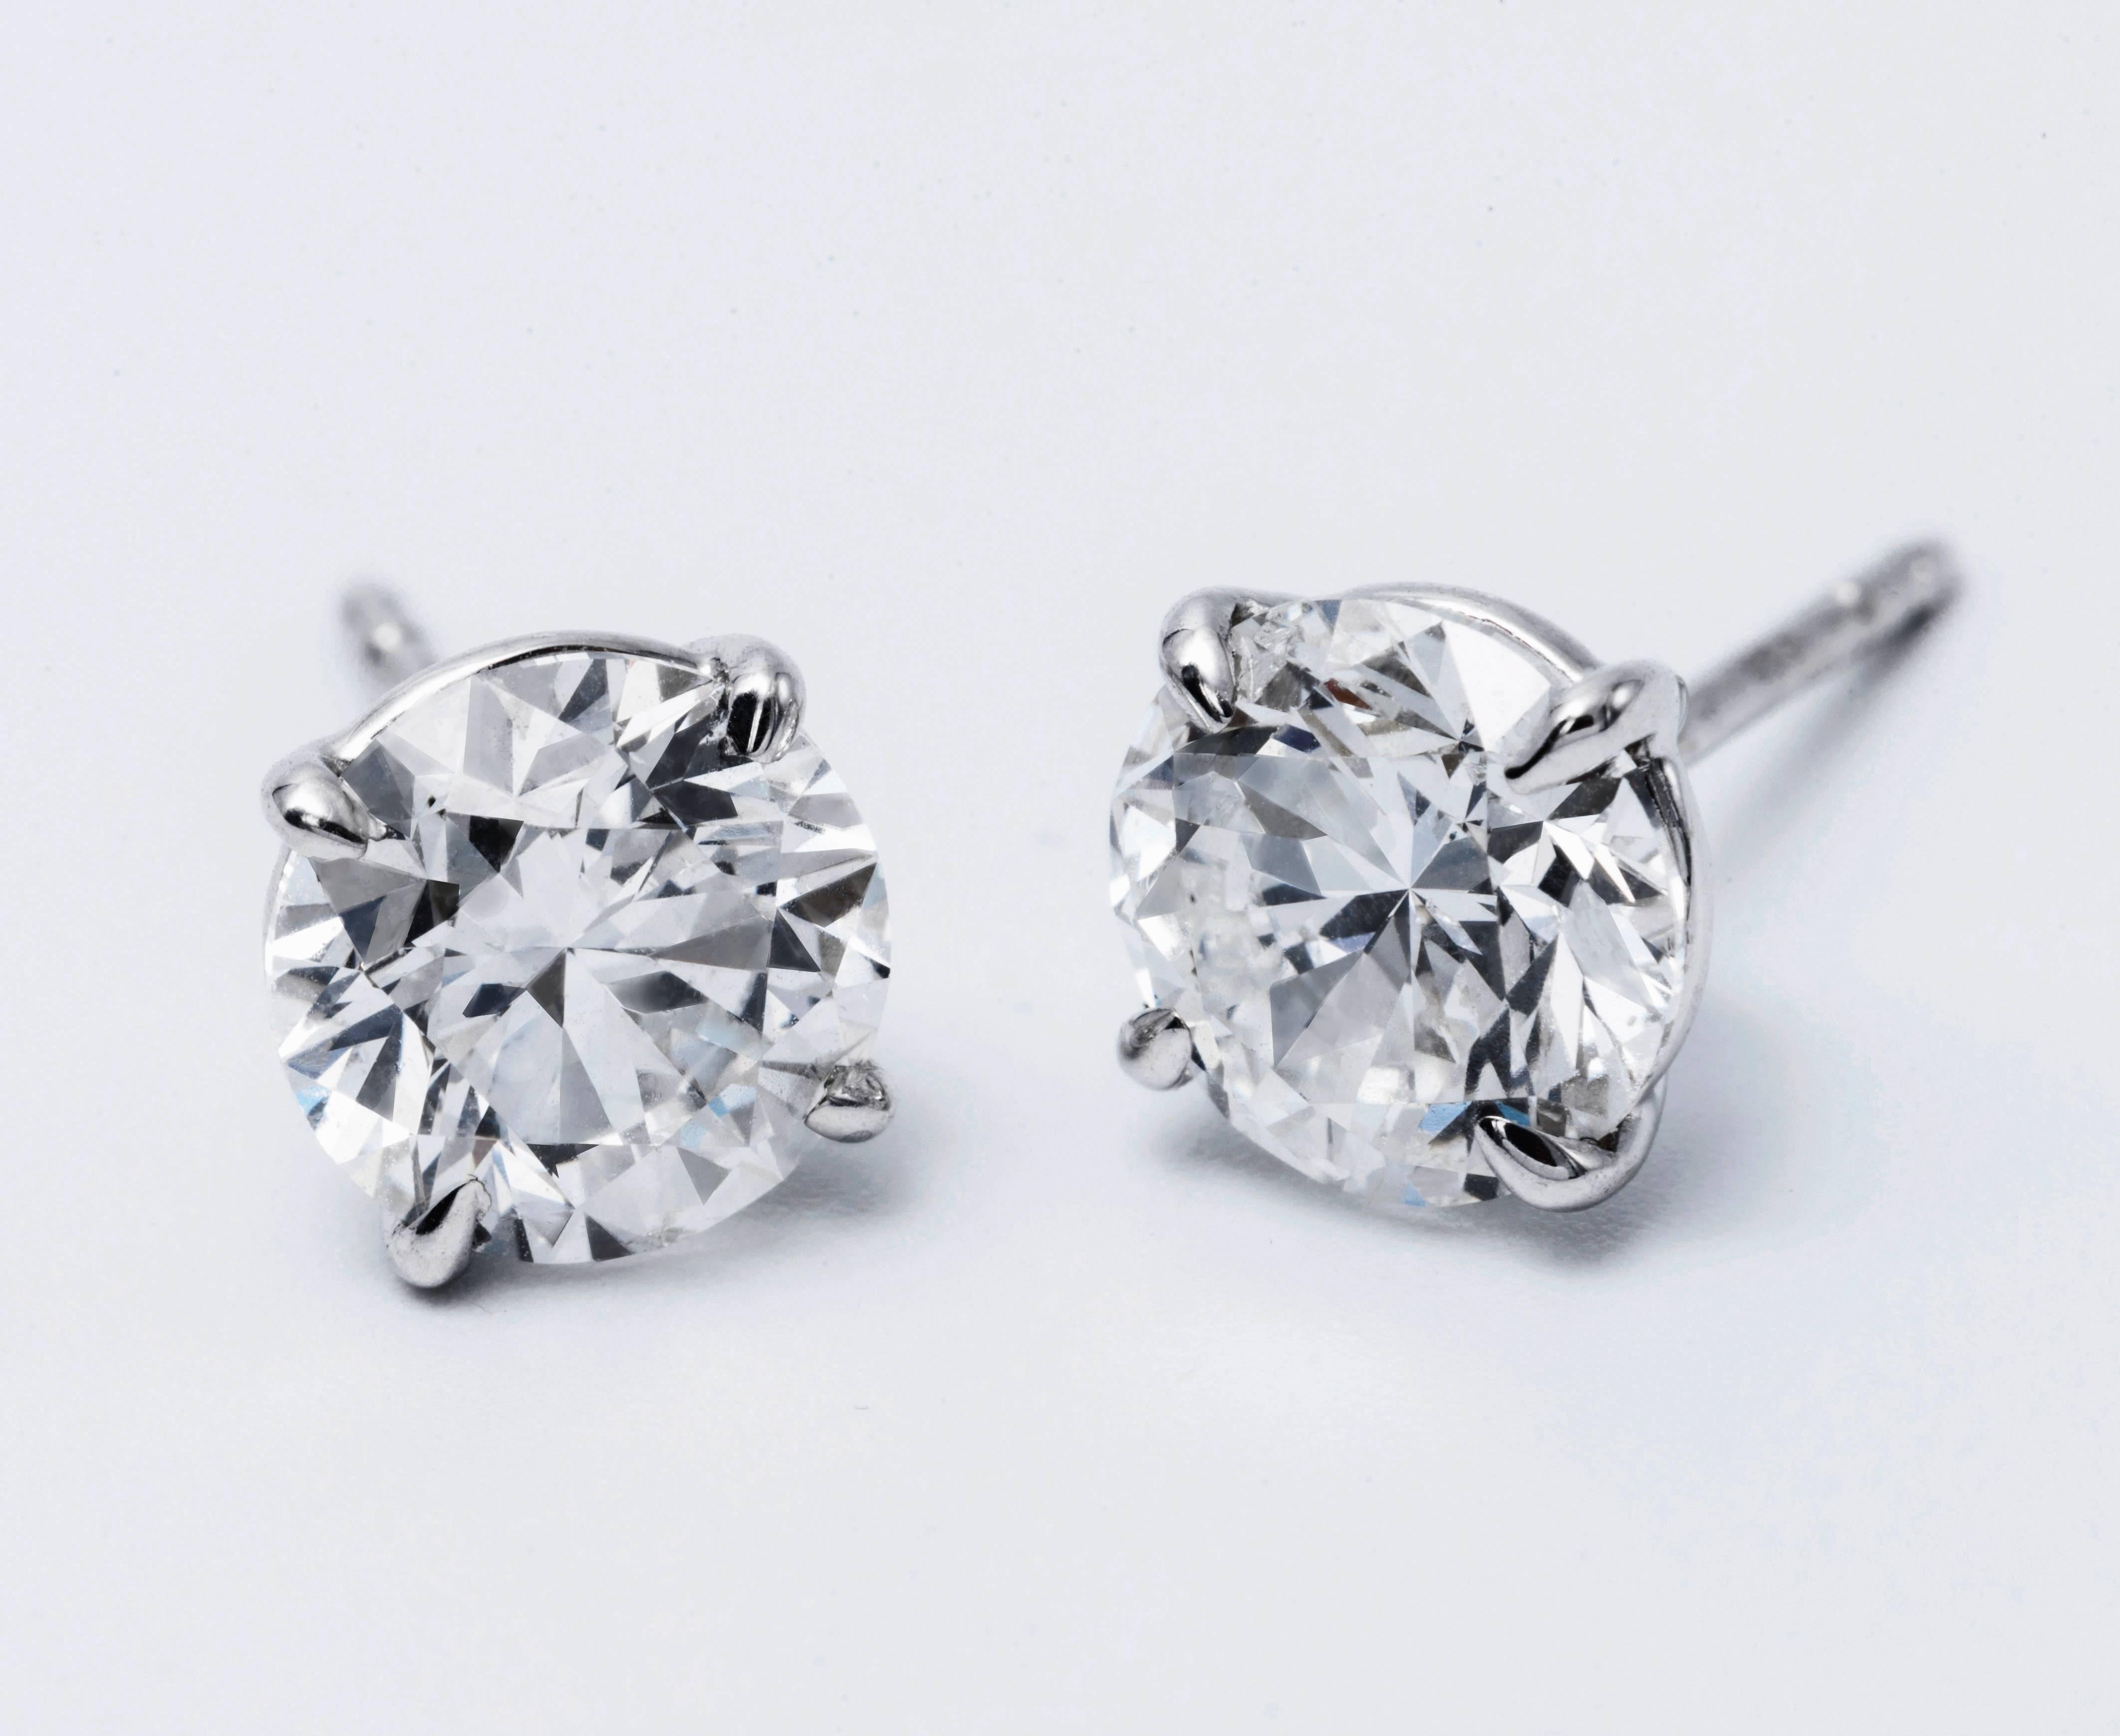 18K 4 prong Diamond Studs
H color SI3 Quality
Very White and full of life.
You are going to love this pair.